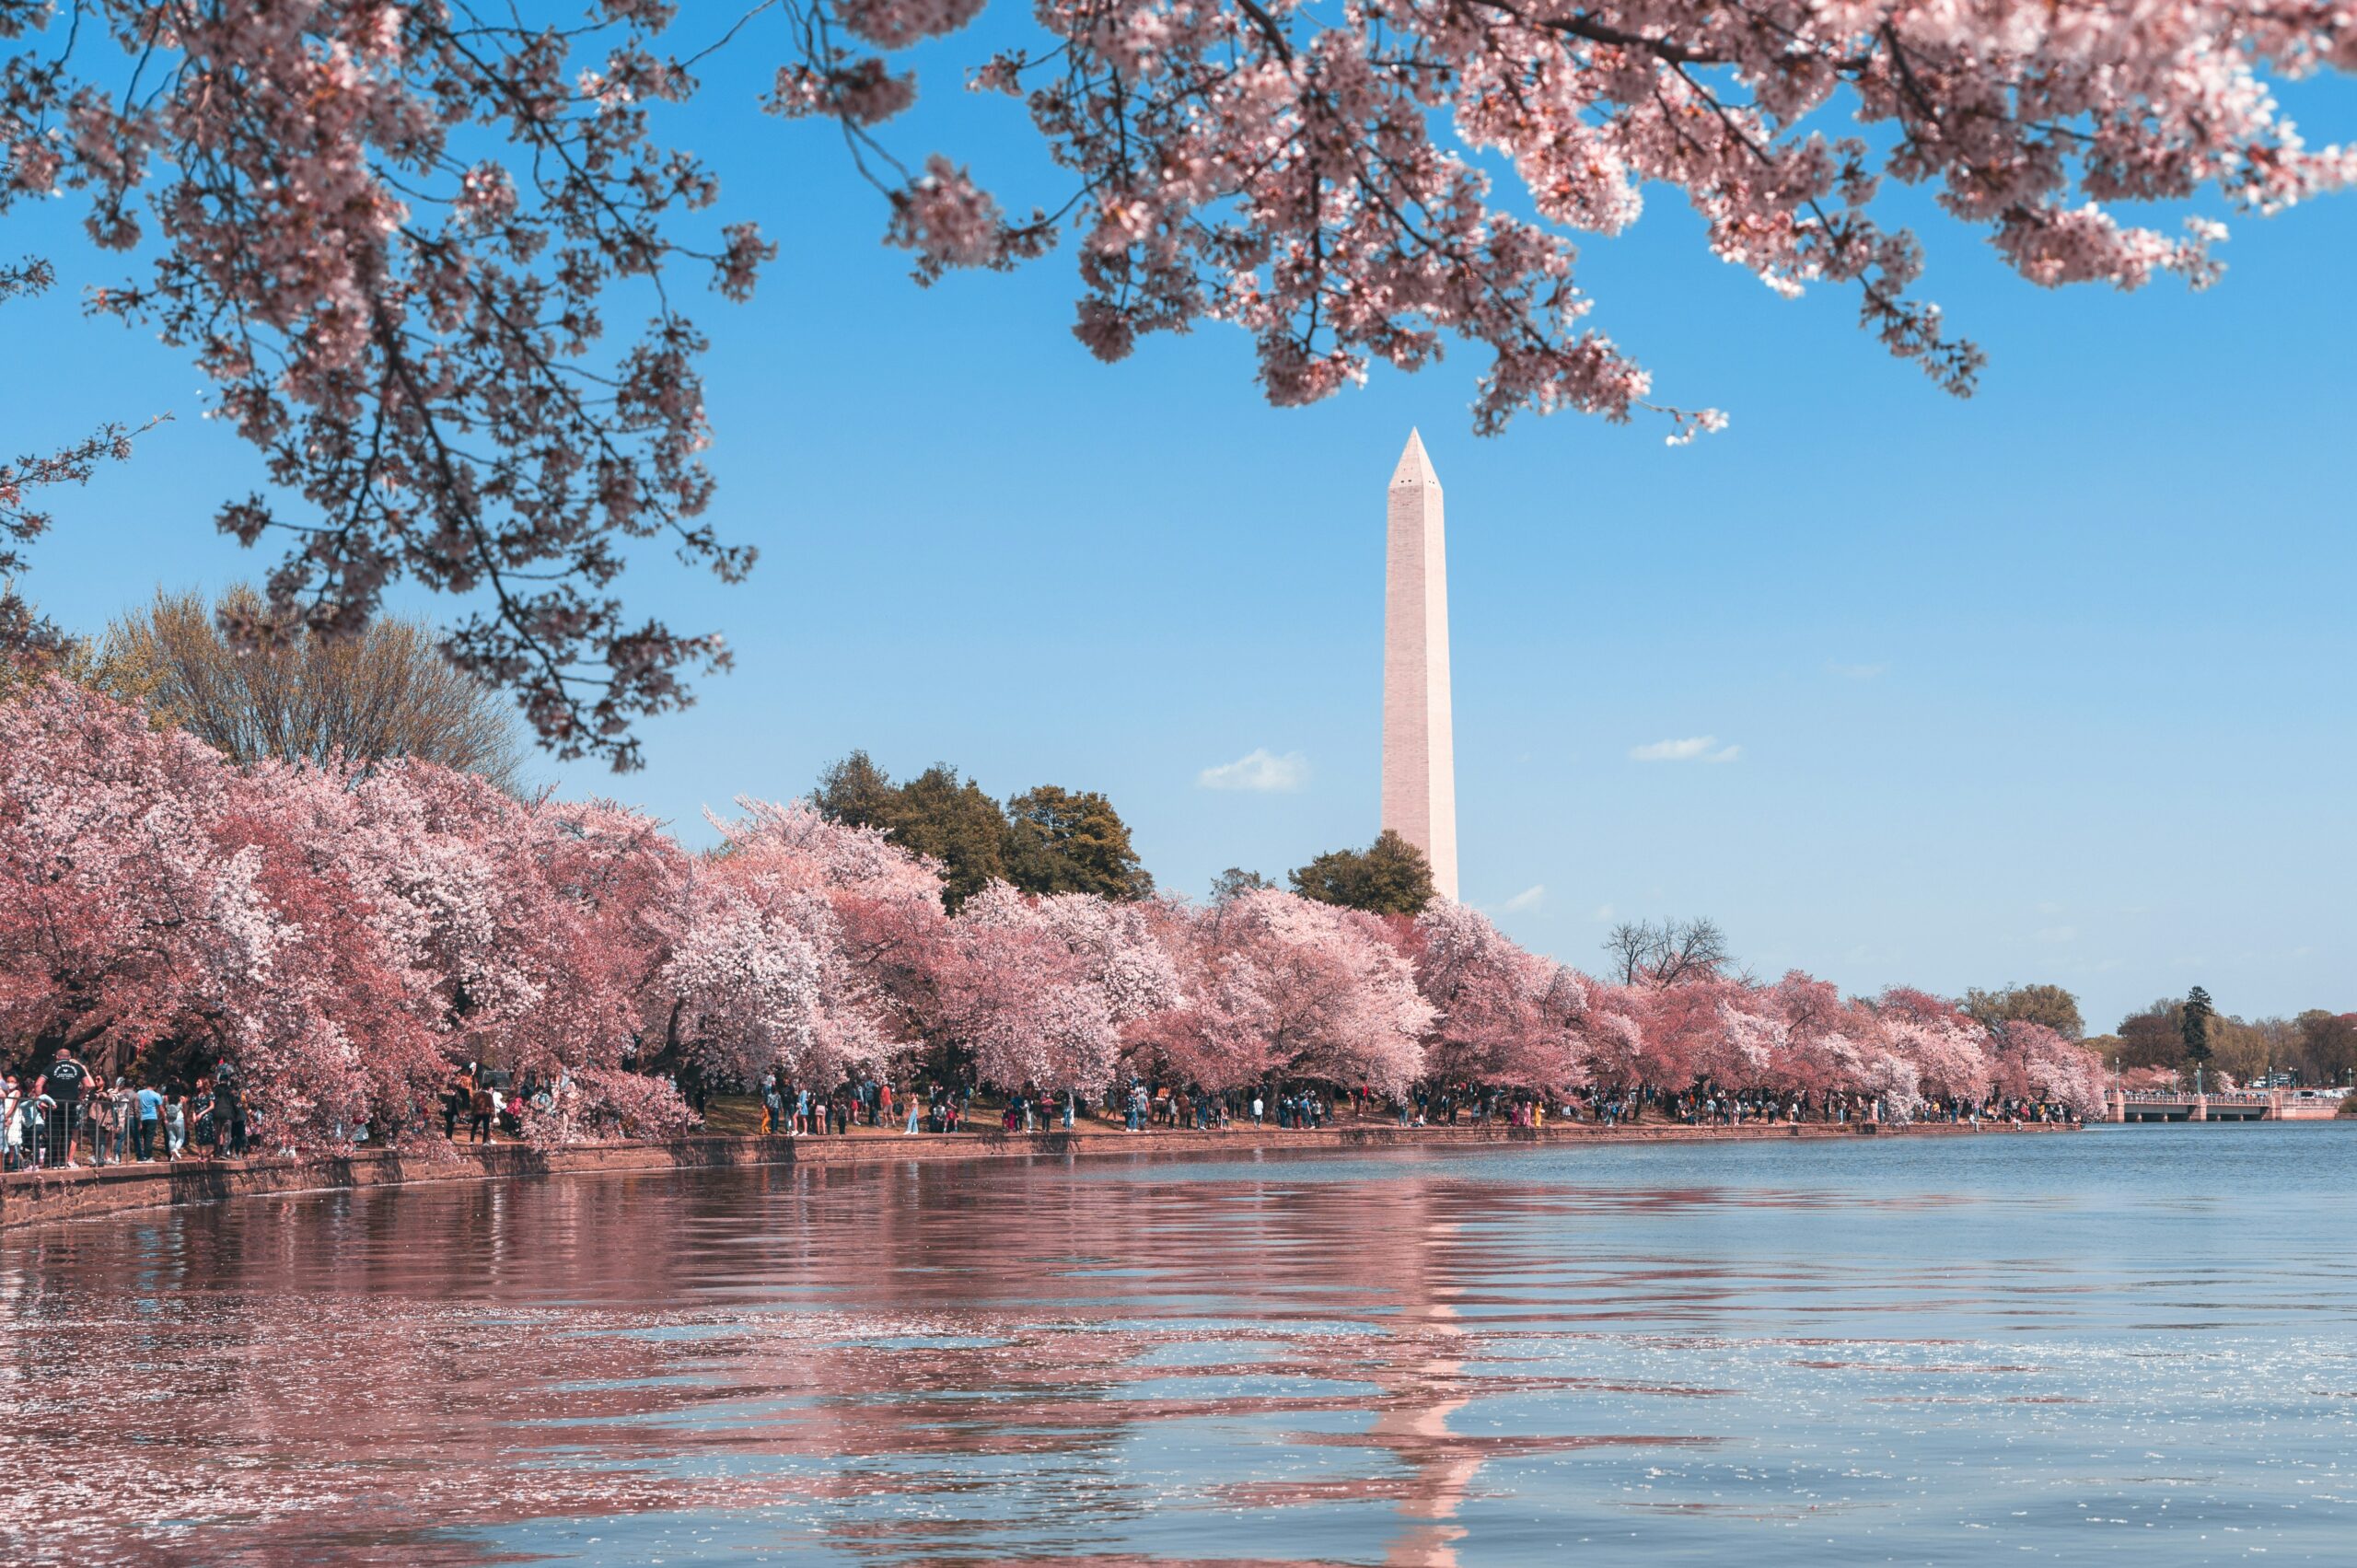 D.C. Cherry Blossoms Face Climate Activists’ Threats – A Concern for All